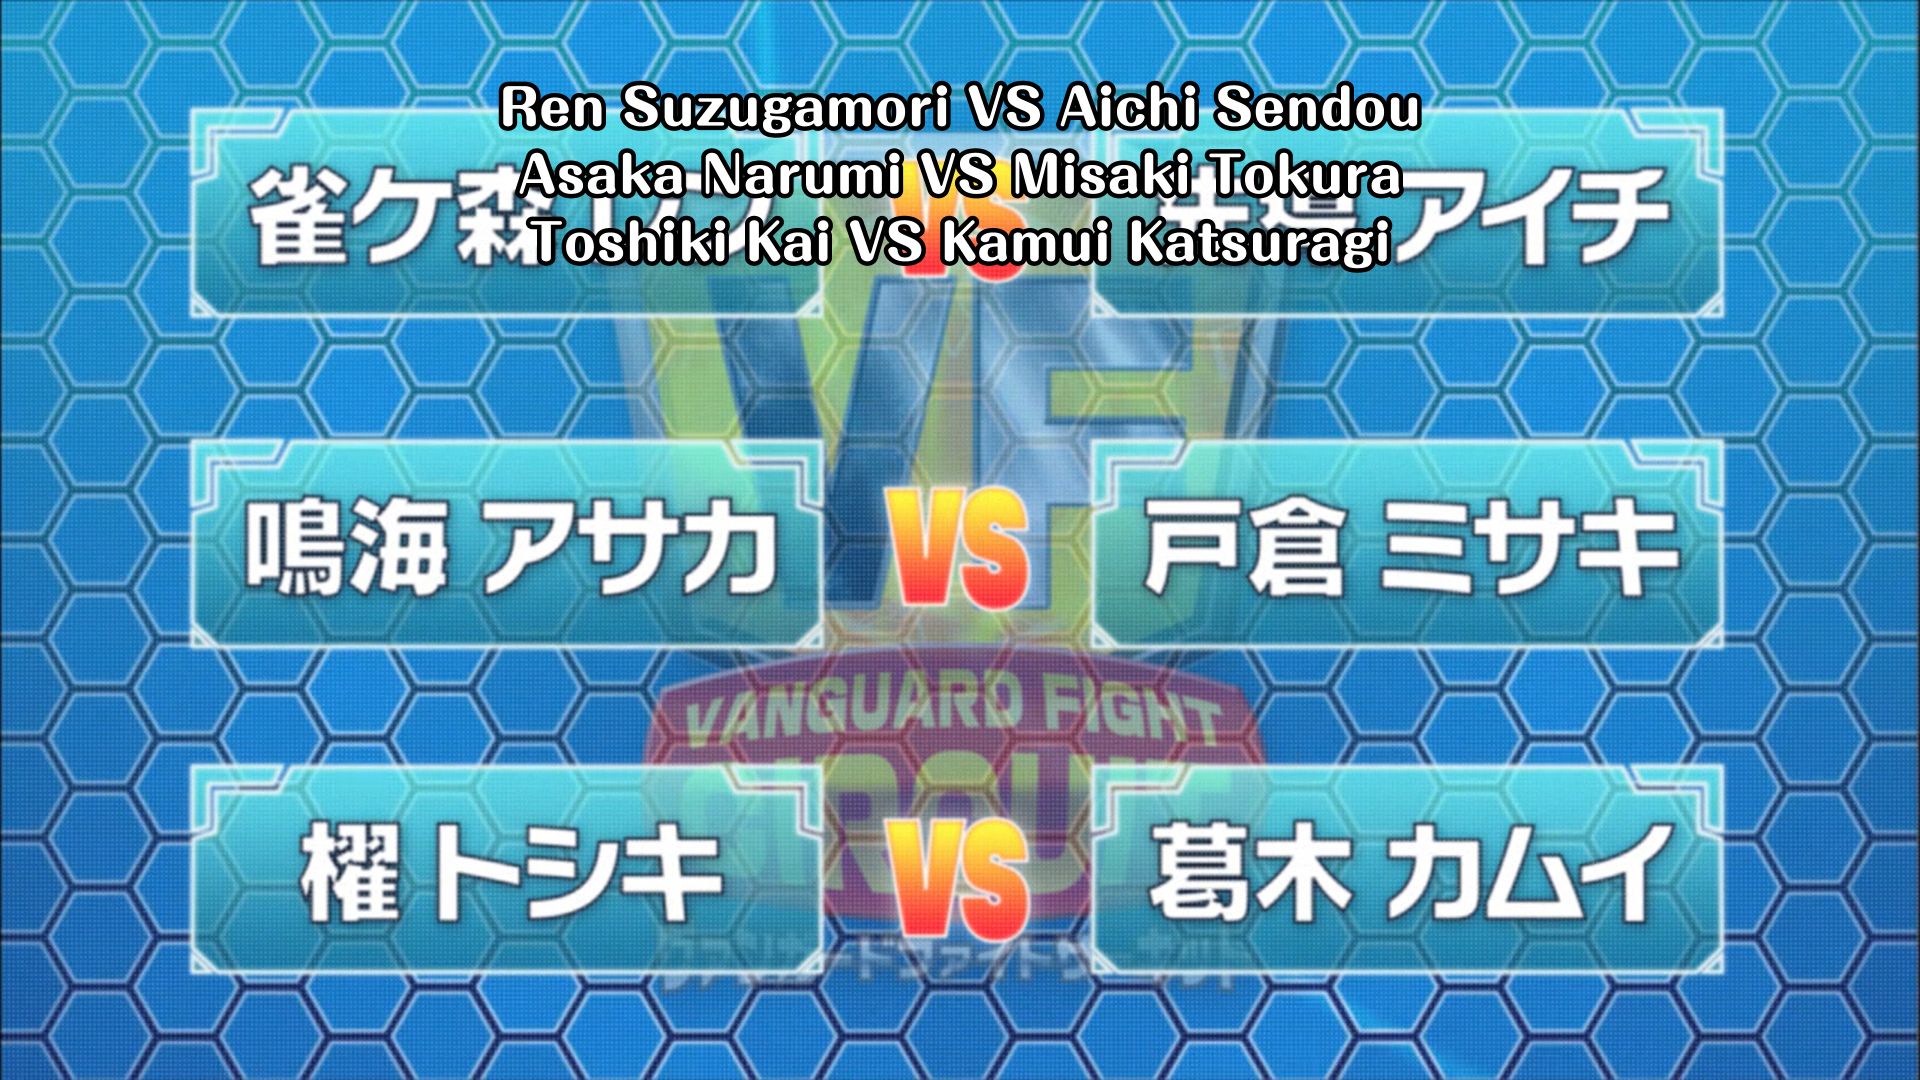 The second season could have been better with a more radical match-ups though. How about Aichi vs. Asaka and Misaki vs. Ren?